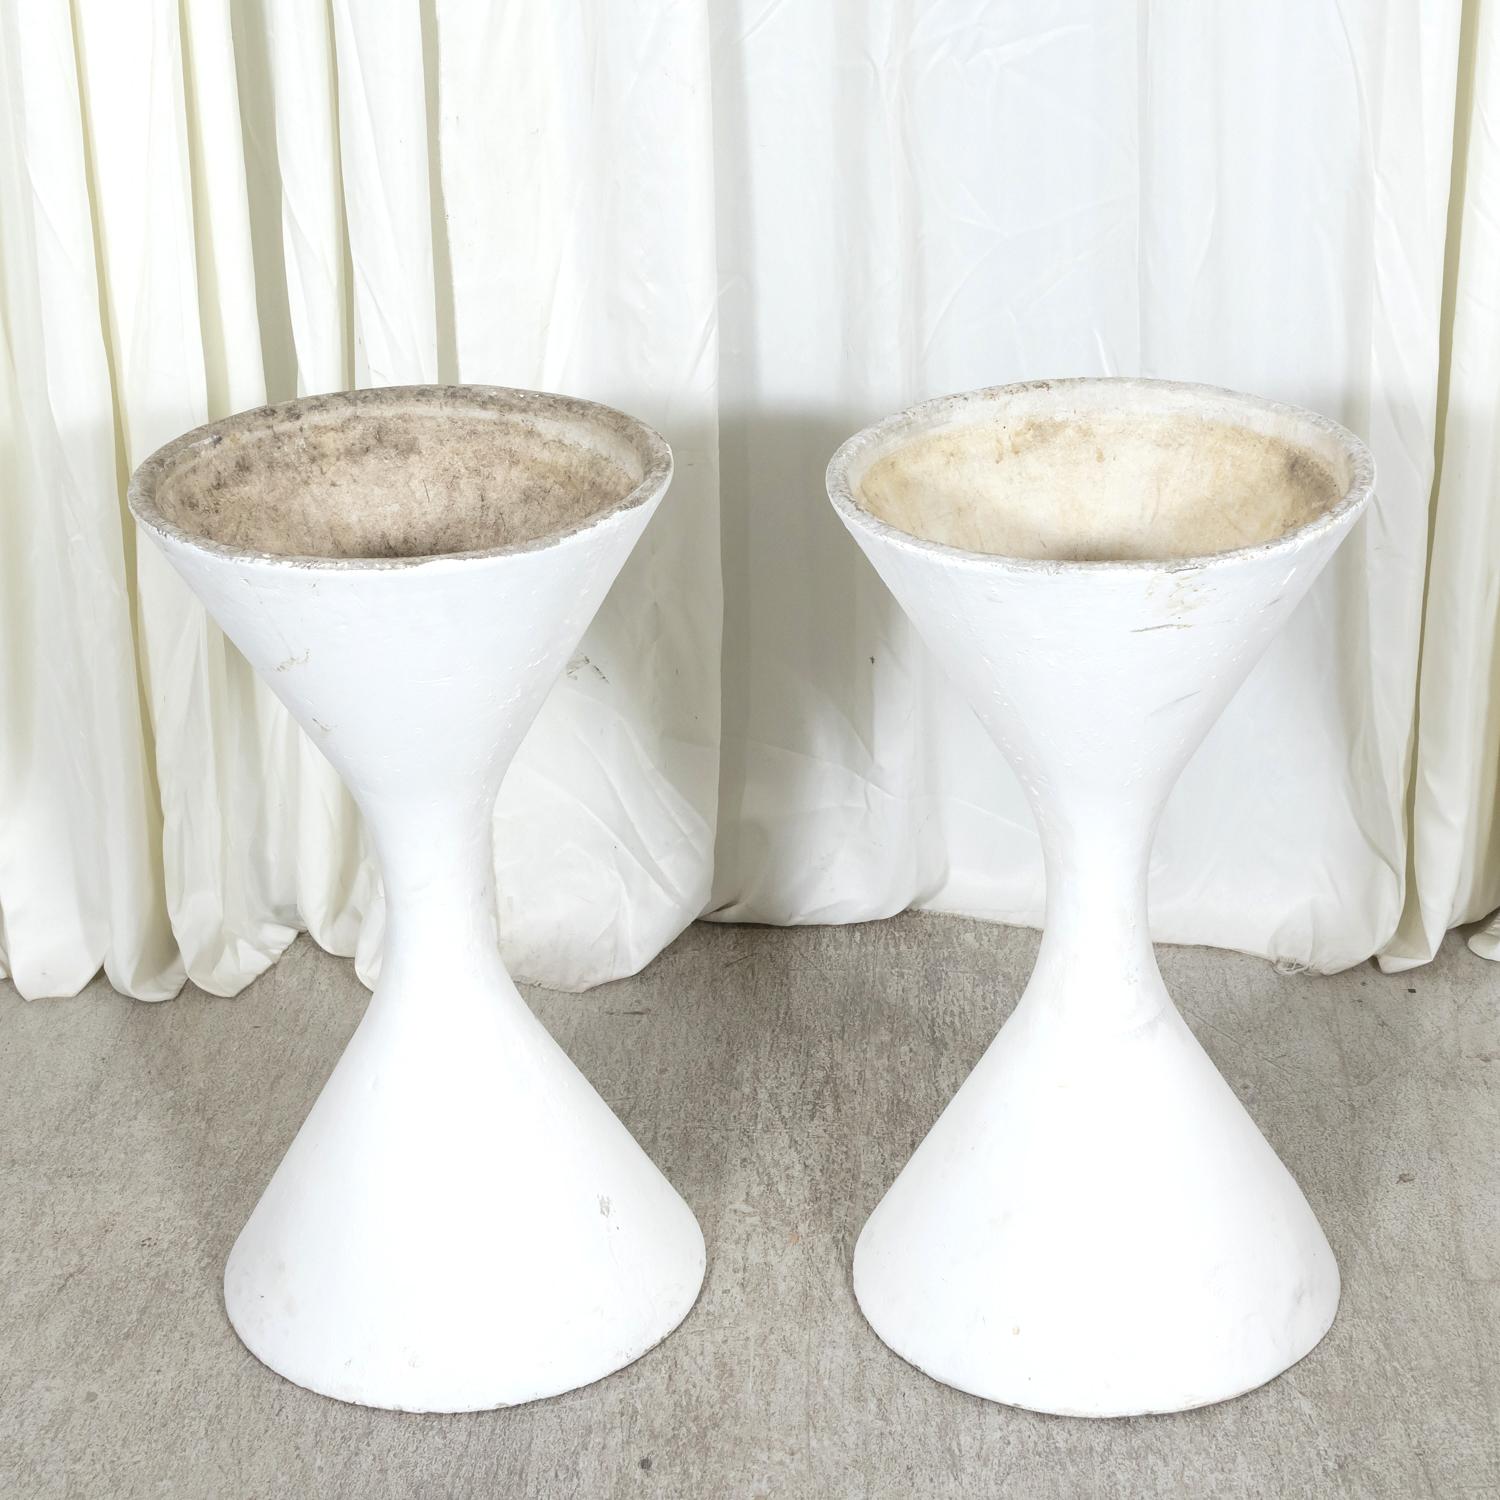  Pair of Mid-Century Modern Willy Guhl X-Large Hourglass Diablo Planters For Sale 2